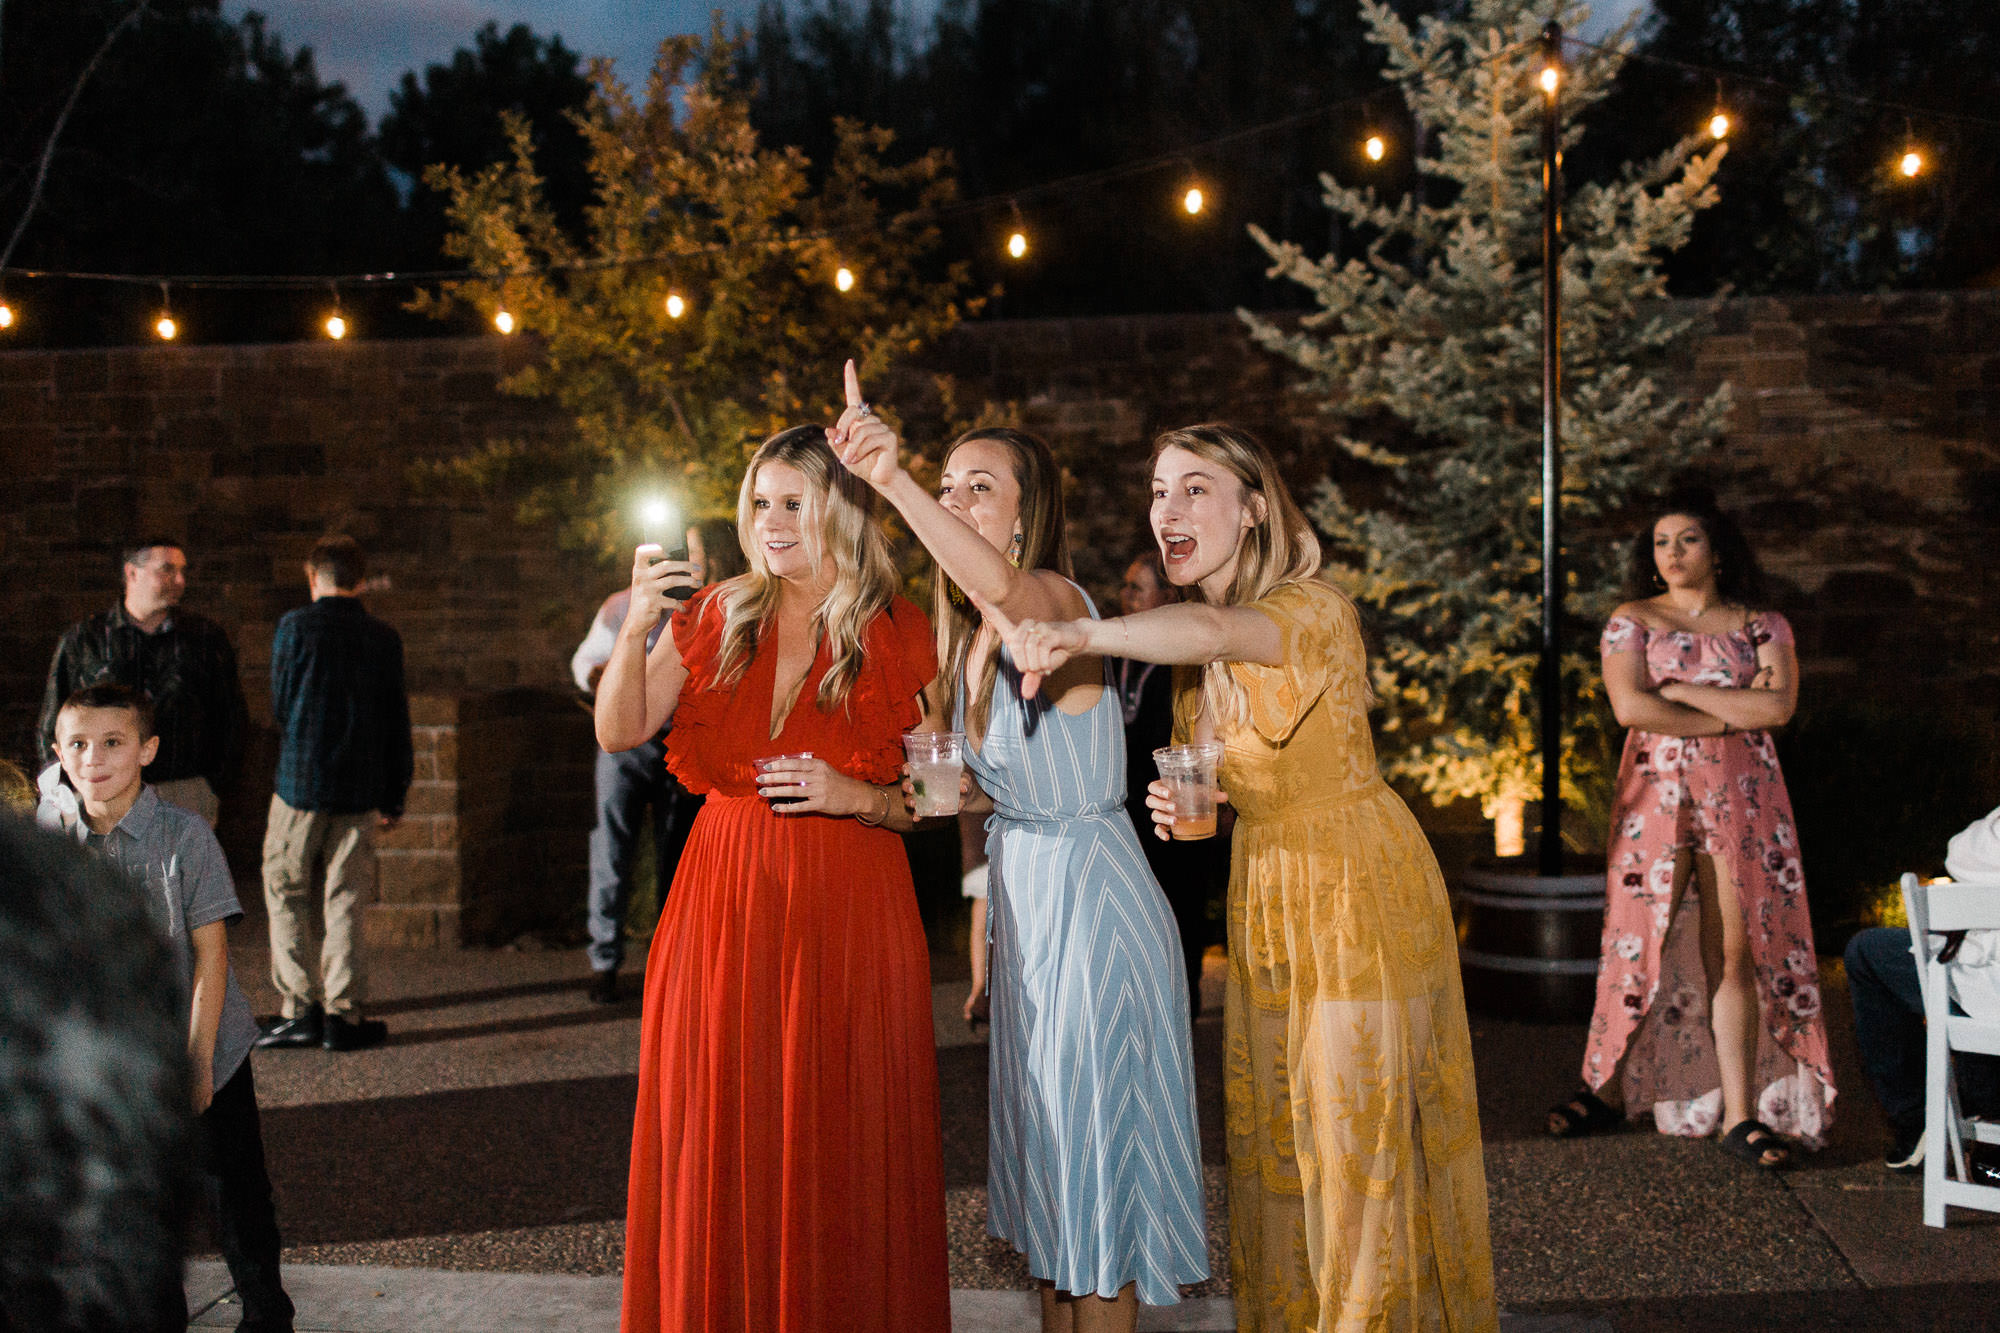 Guests celebrate at Top Club wedding in Bend, Oregon